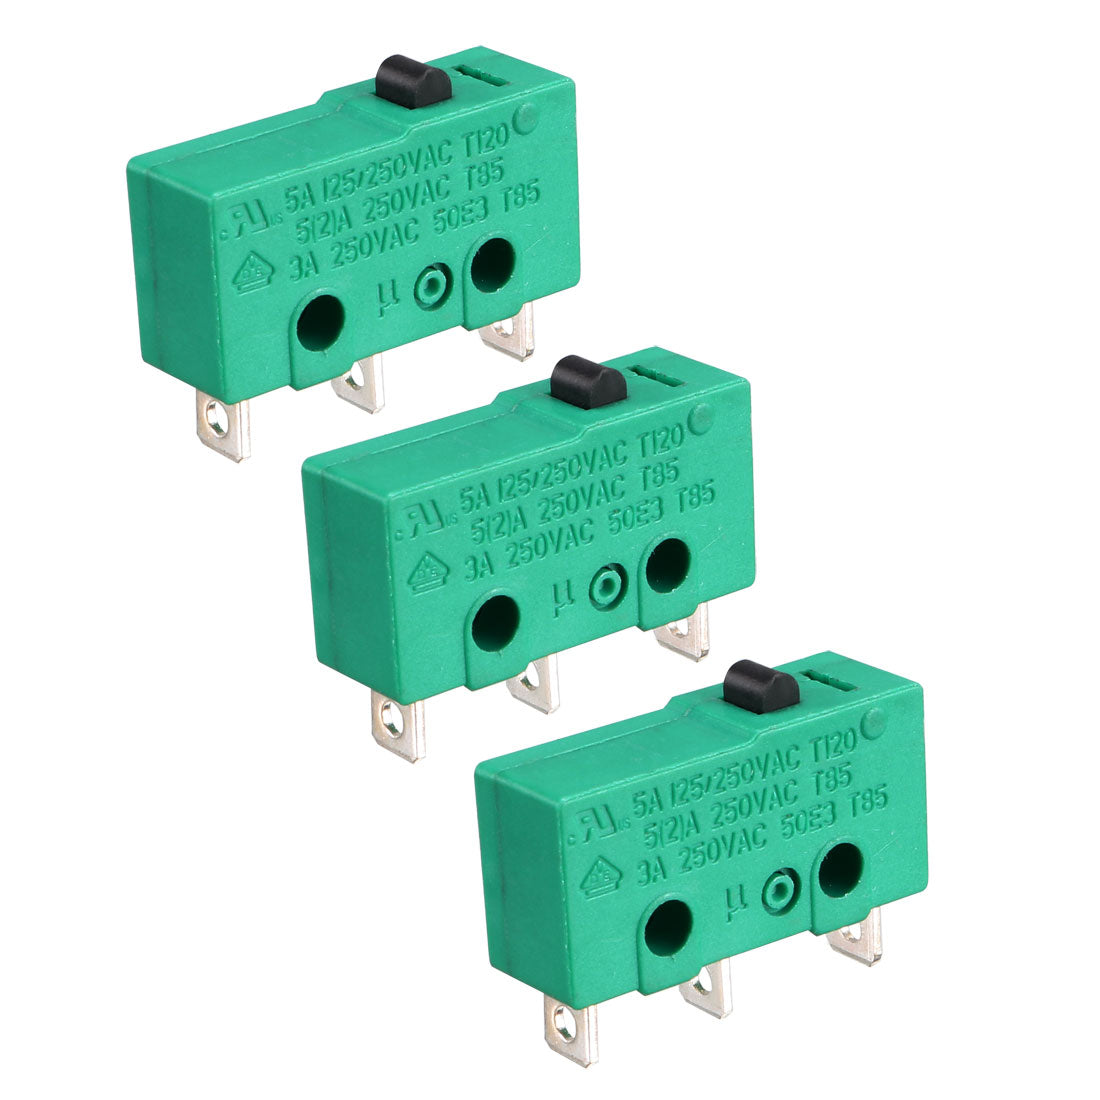 uxcell Uxcell 3PCS KW4-3Z-3 Micro Limit Switch SPDT NO NC 3 Terminals Momentary Push Button Actuator Green